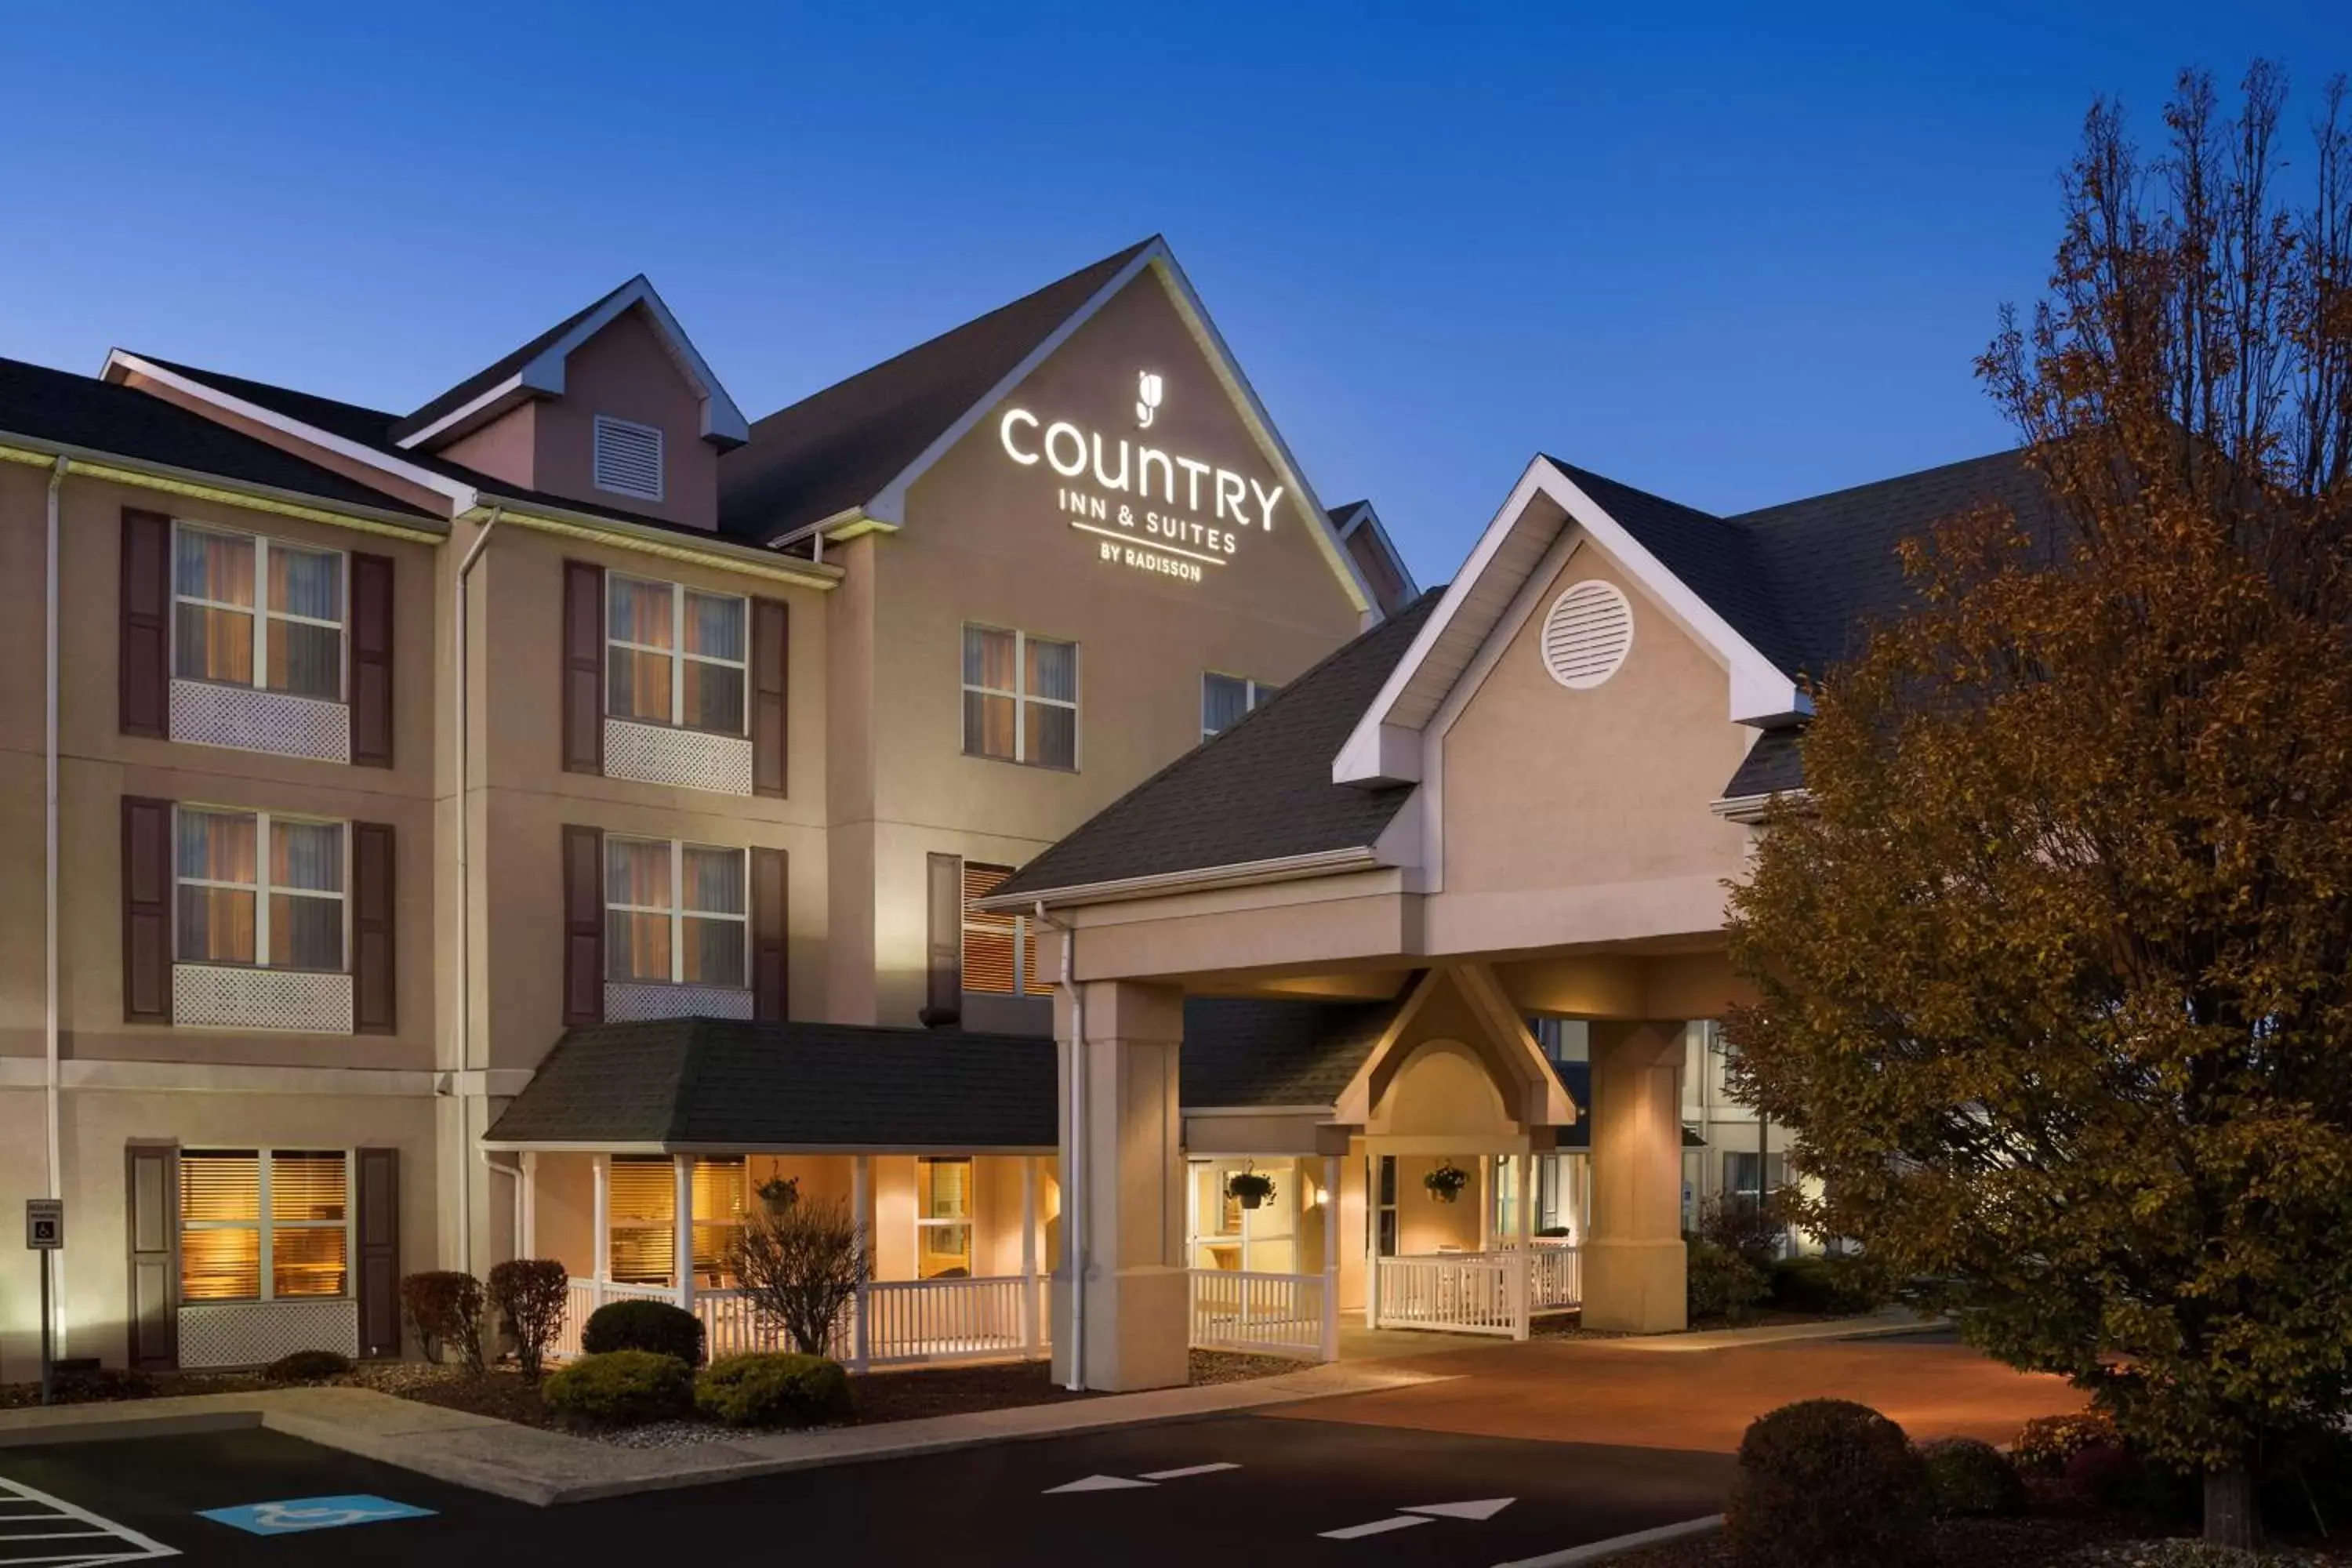 Property building in Country Inn & Suites by Radisson, Frackville (Pottsville), PA